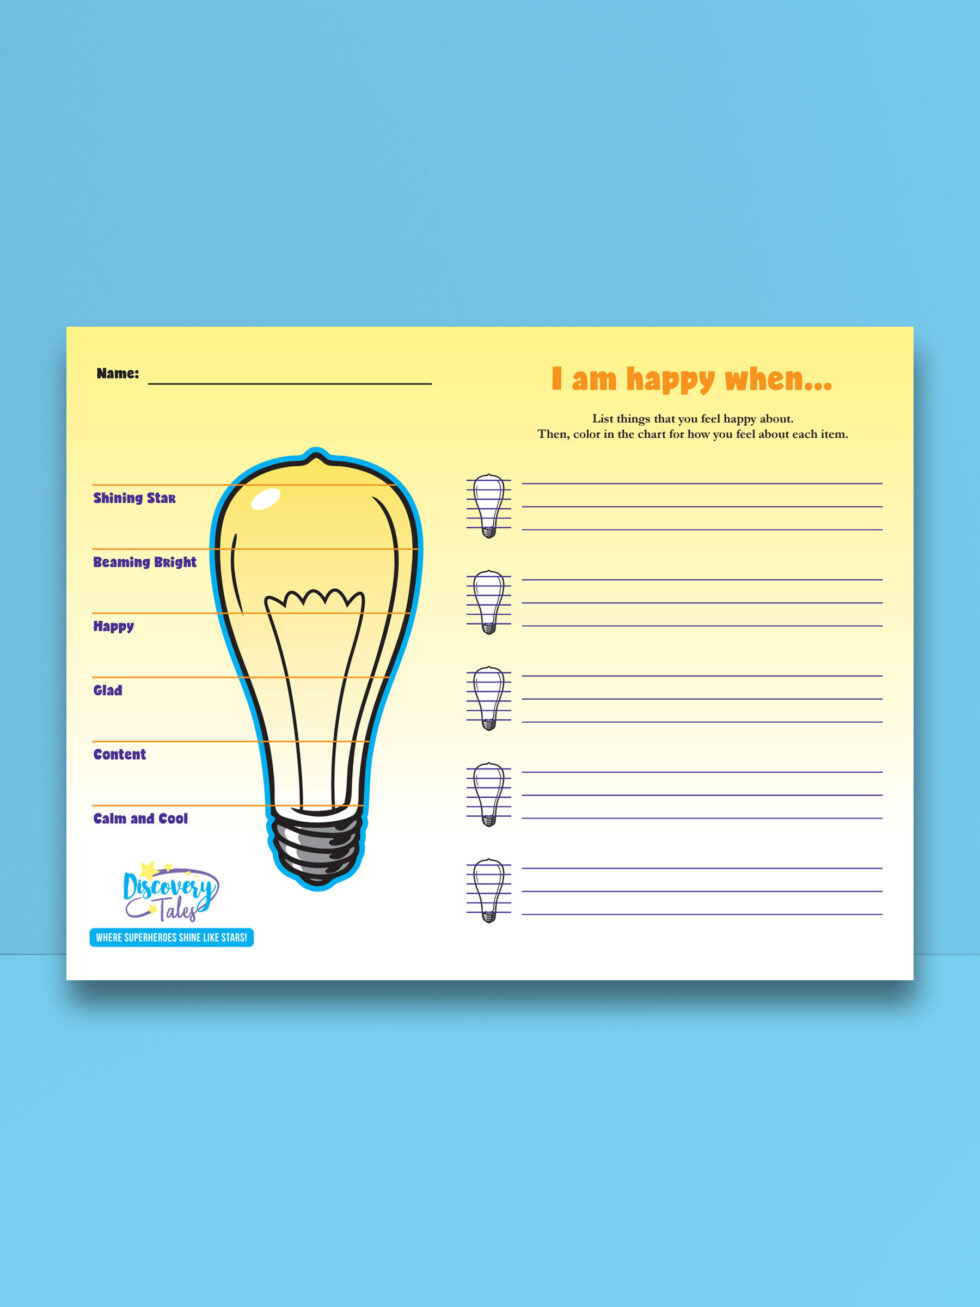 Stellar-Way-Emotional-Health-Well-Being-I-Am-Happy-Sad-Pages-Poster-Product-2